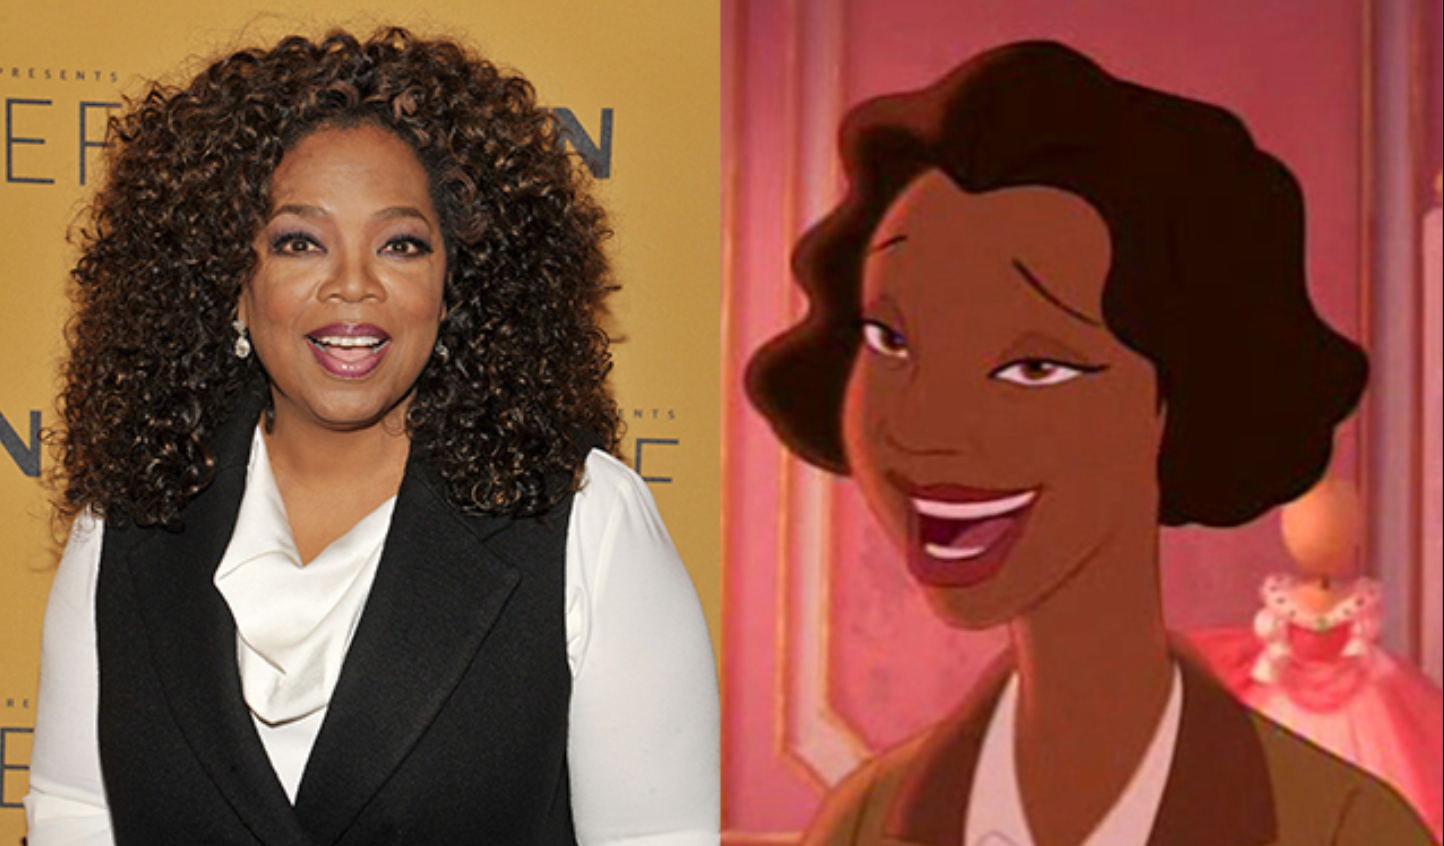 Oprah Winfrey as Eudora in The Princess and the Frog